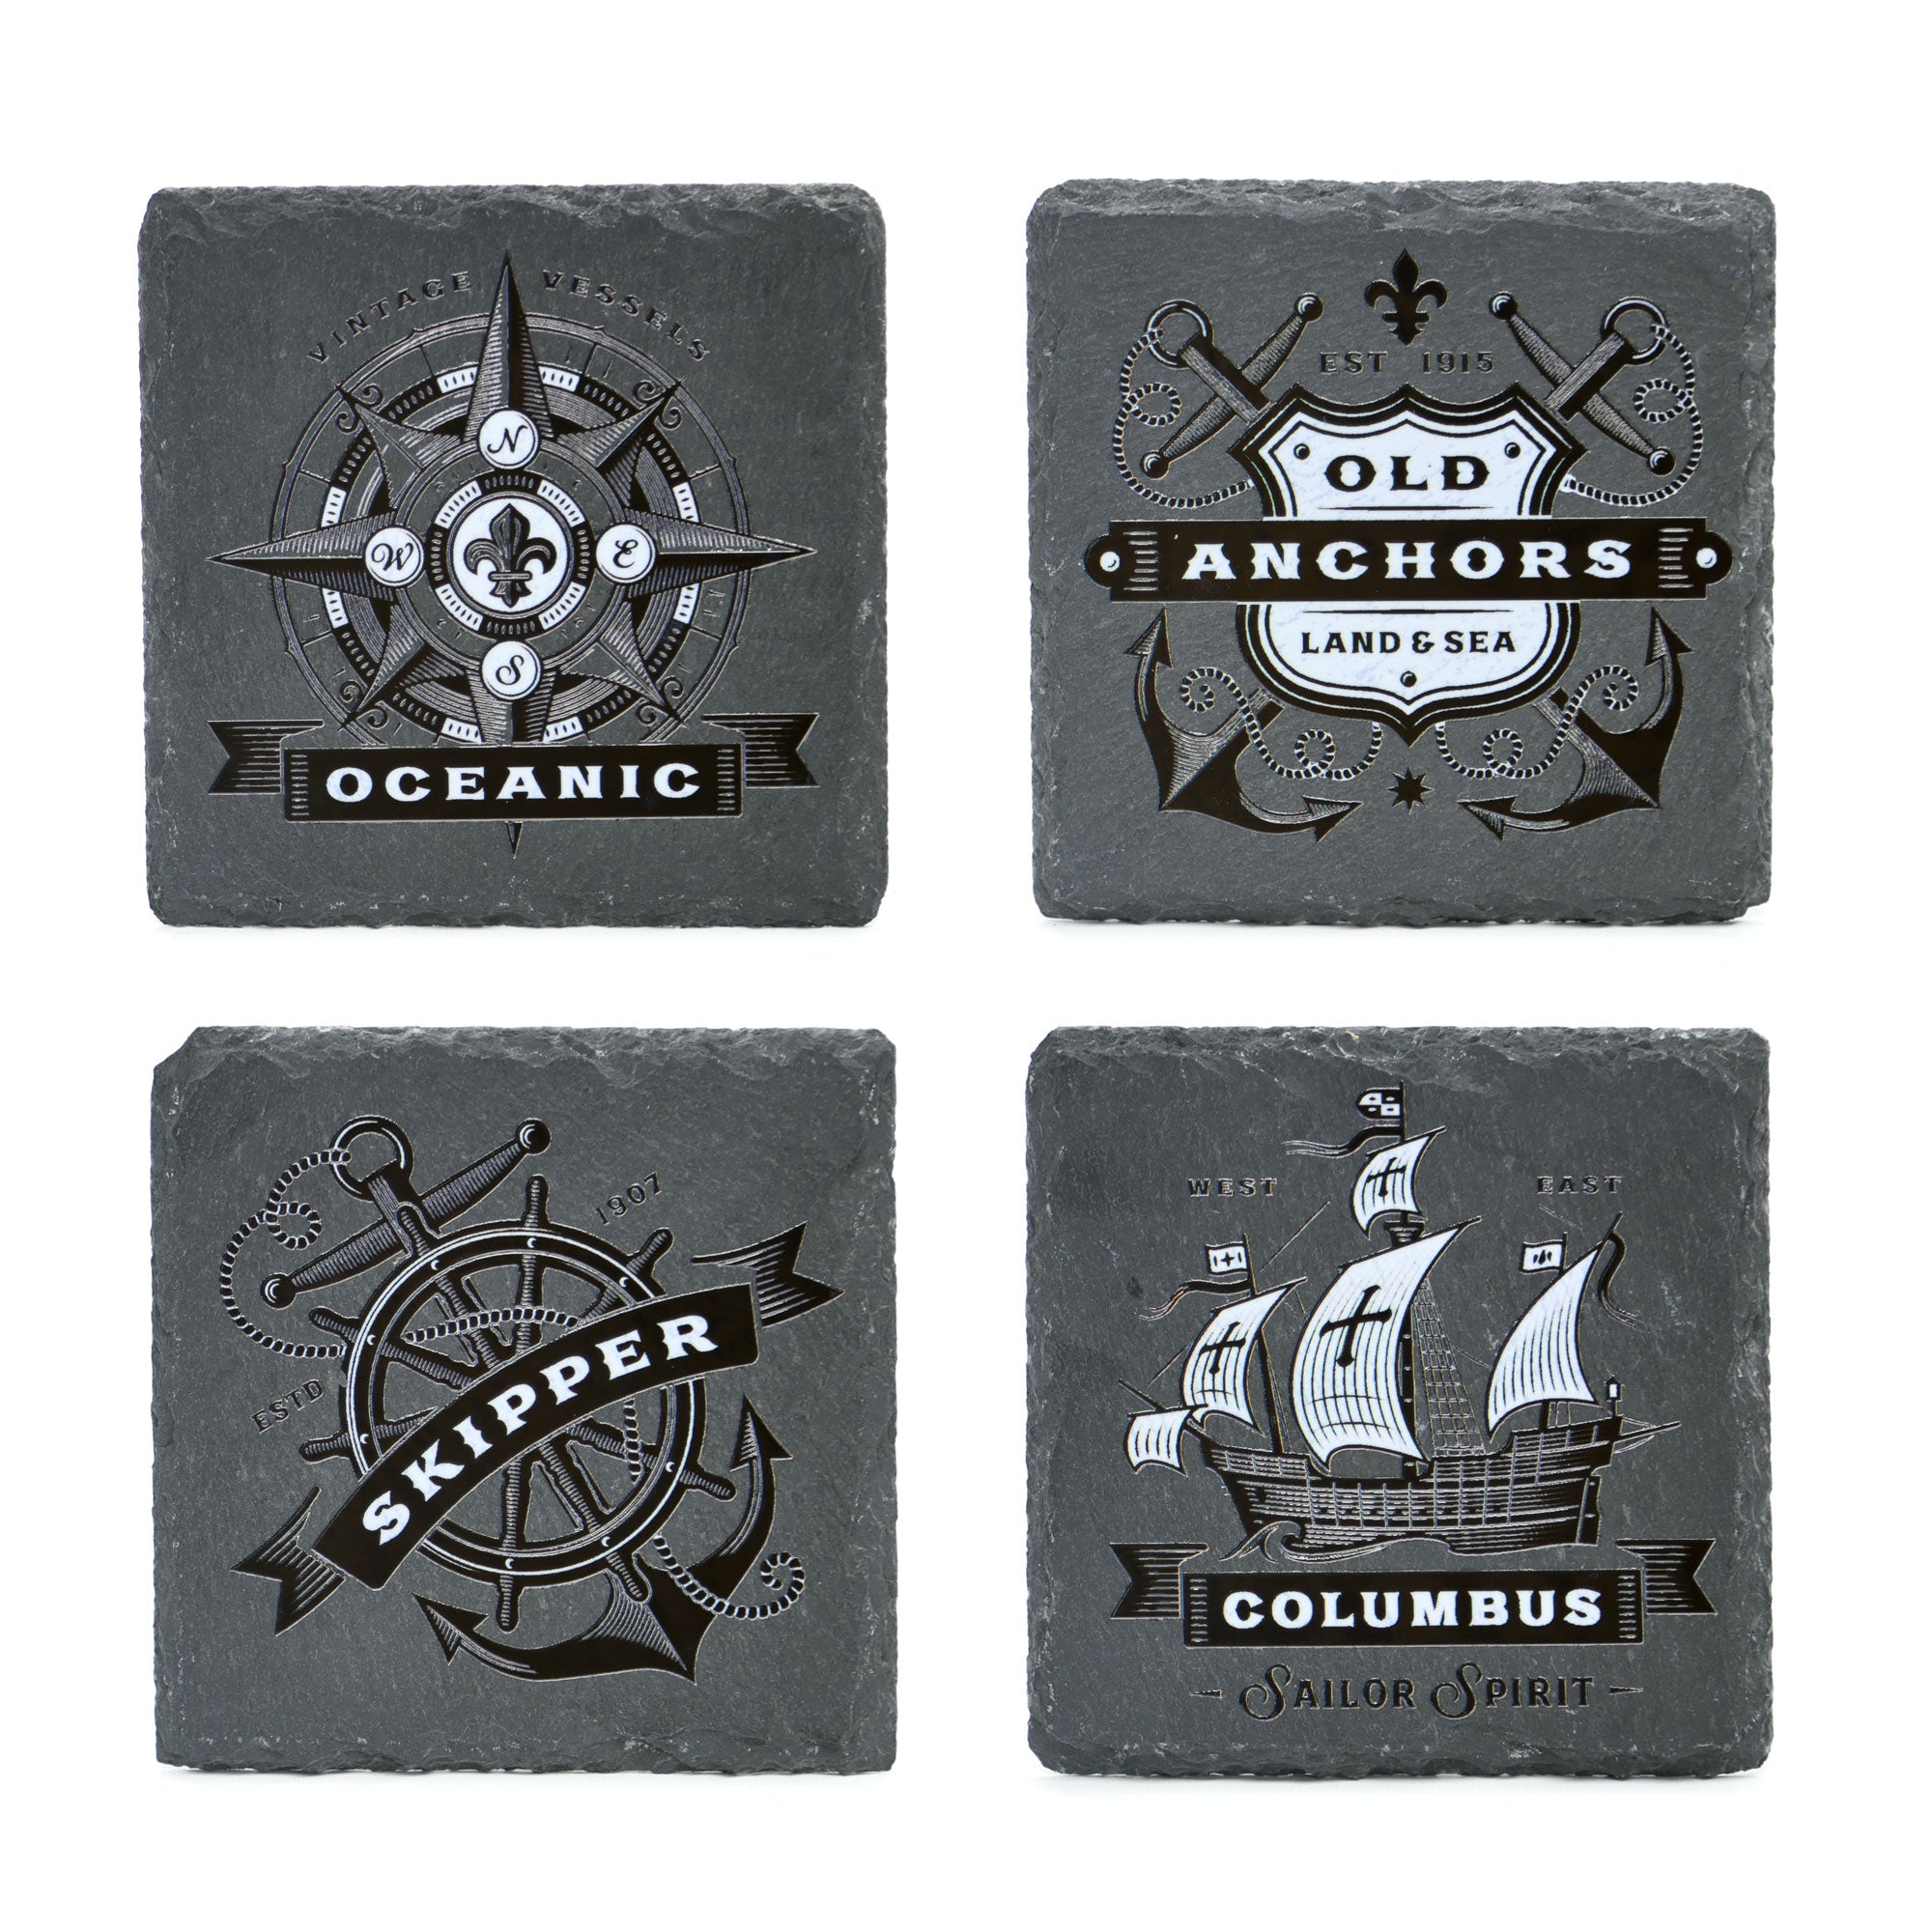 Slate Coaster Set of 4 Pieces with a Nautical  Black Designs